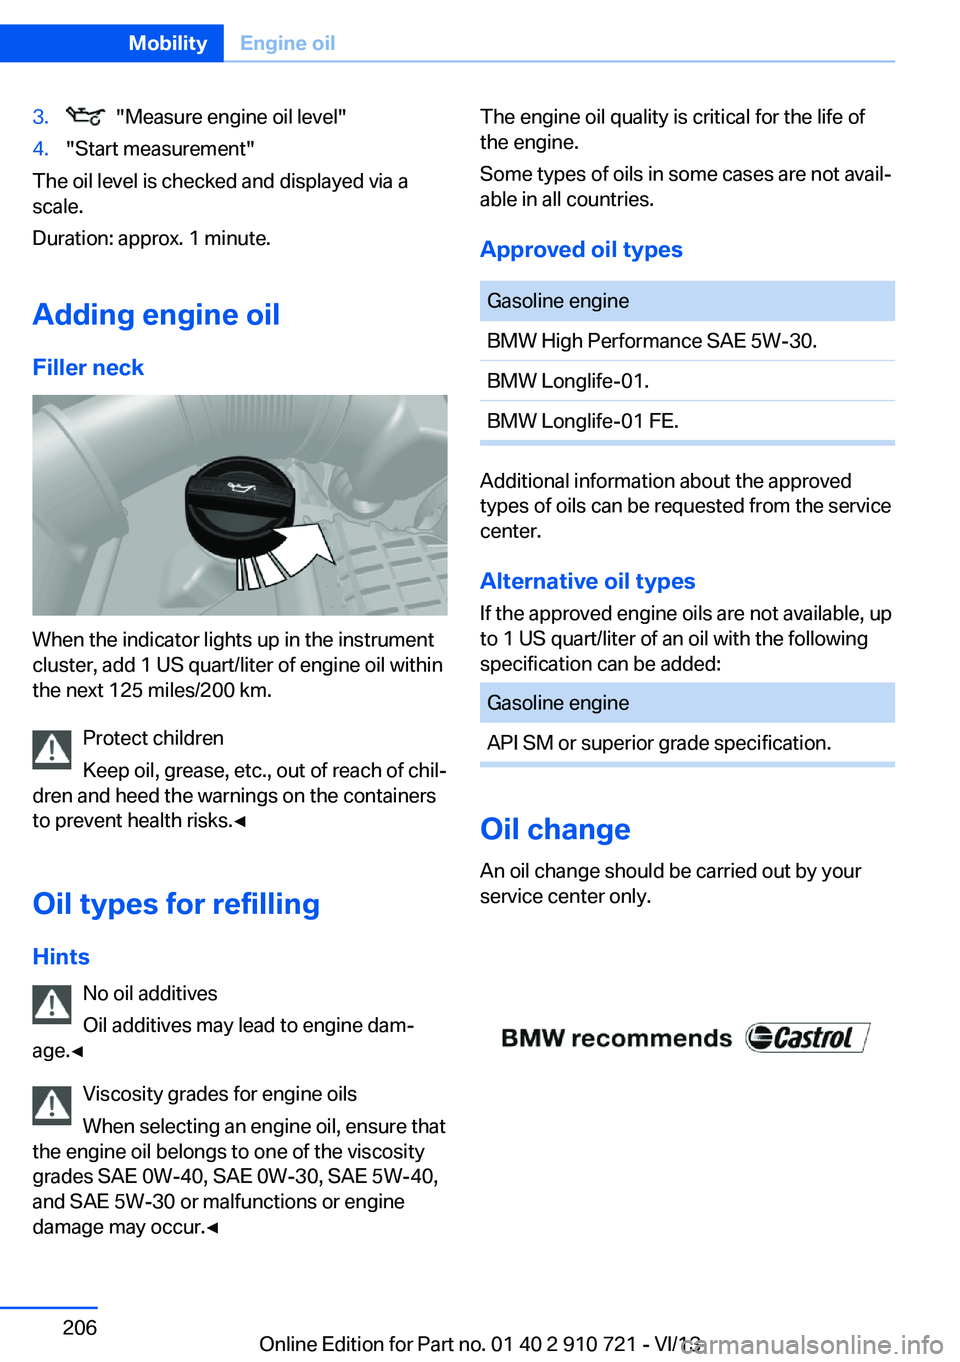 BMW 650I CONVERTIBLE 2014  Owners Manual 3.  "Measure engine oil level"4."Start measurement"
The oil level is checked and displayed via a
scale.
Duration: approx. 1 minute.
Adding engine oil Filler neck
When the indicator lig